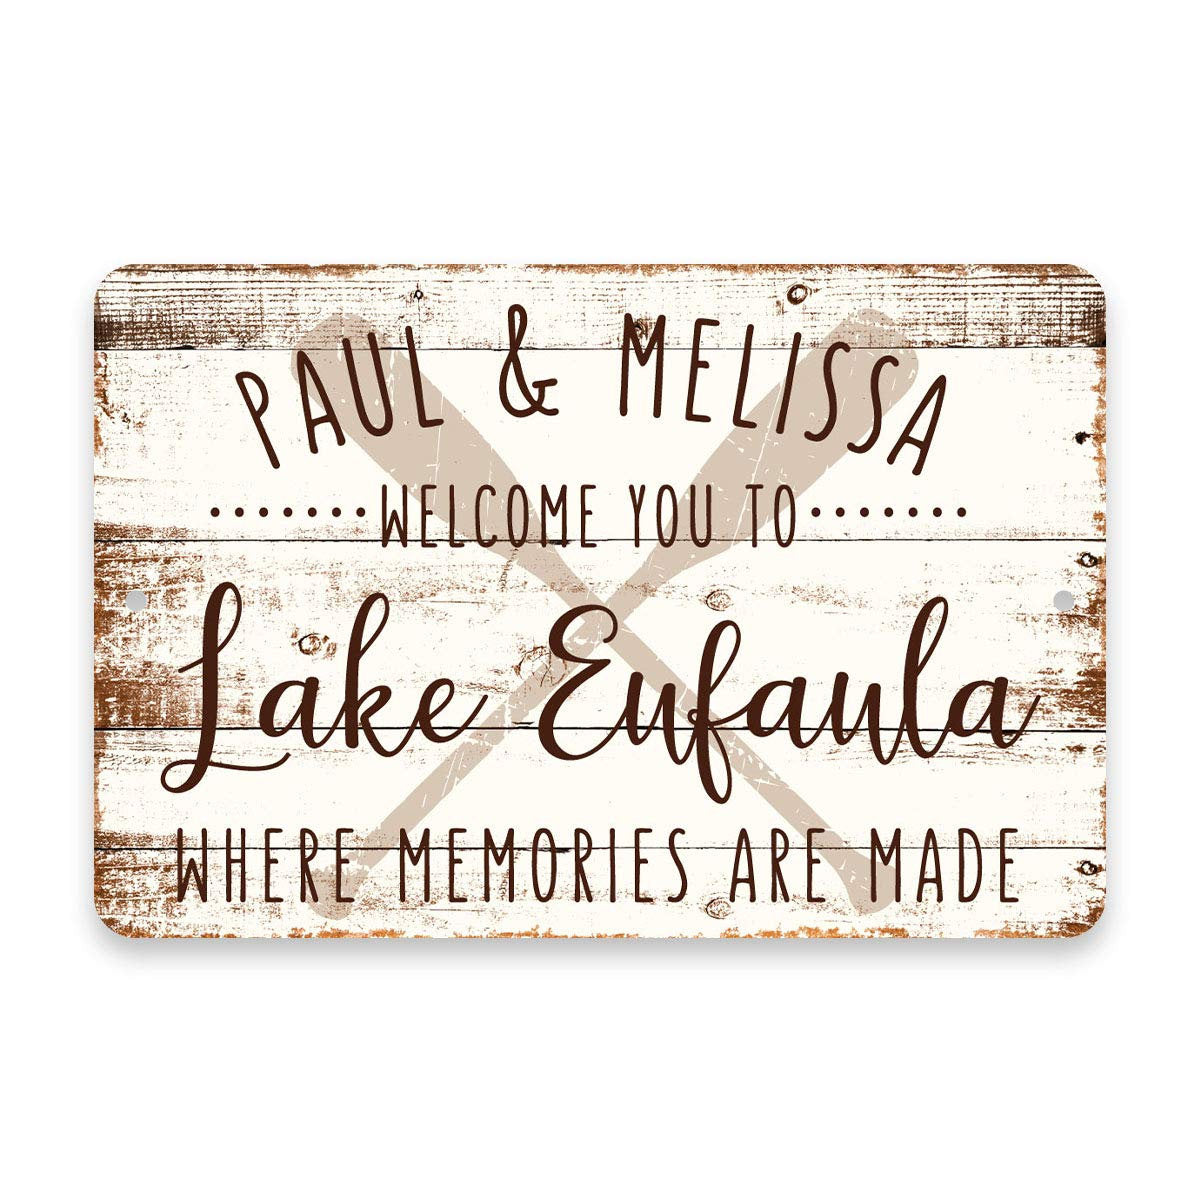 Personalized Welcome to Lake Eufaula Where Memories are Made Sign - 8 X 12 Metal Sign with Wood Look